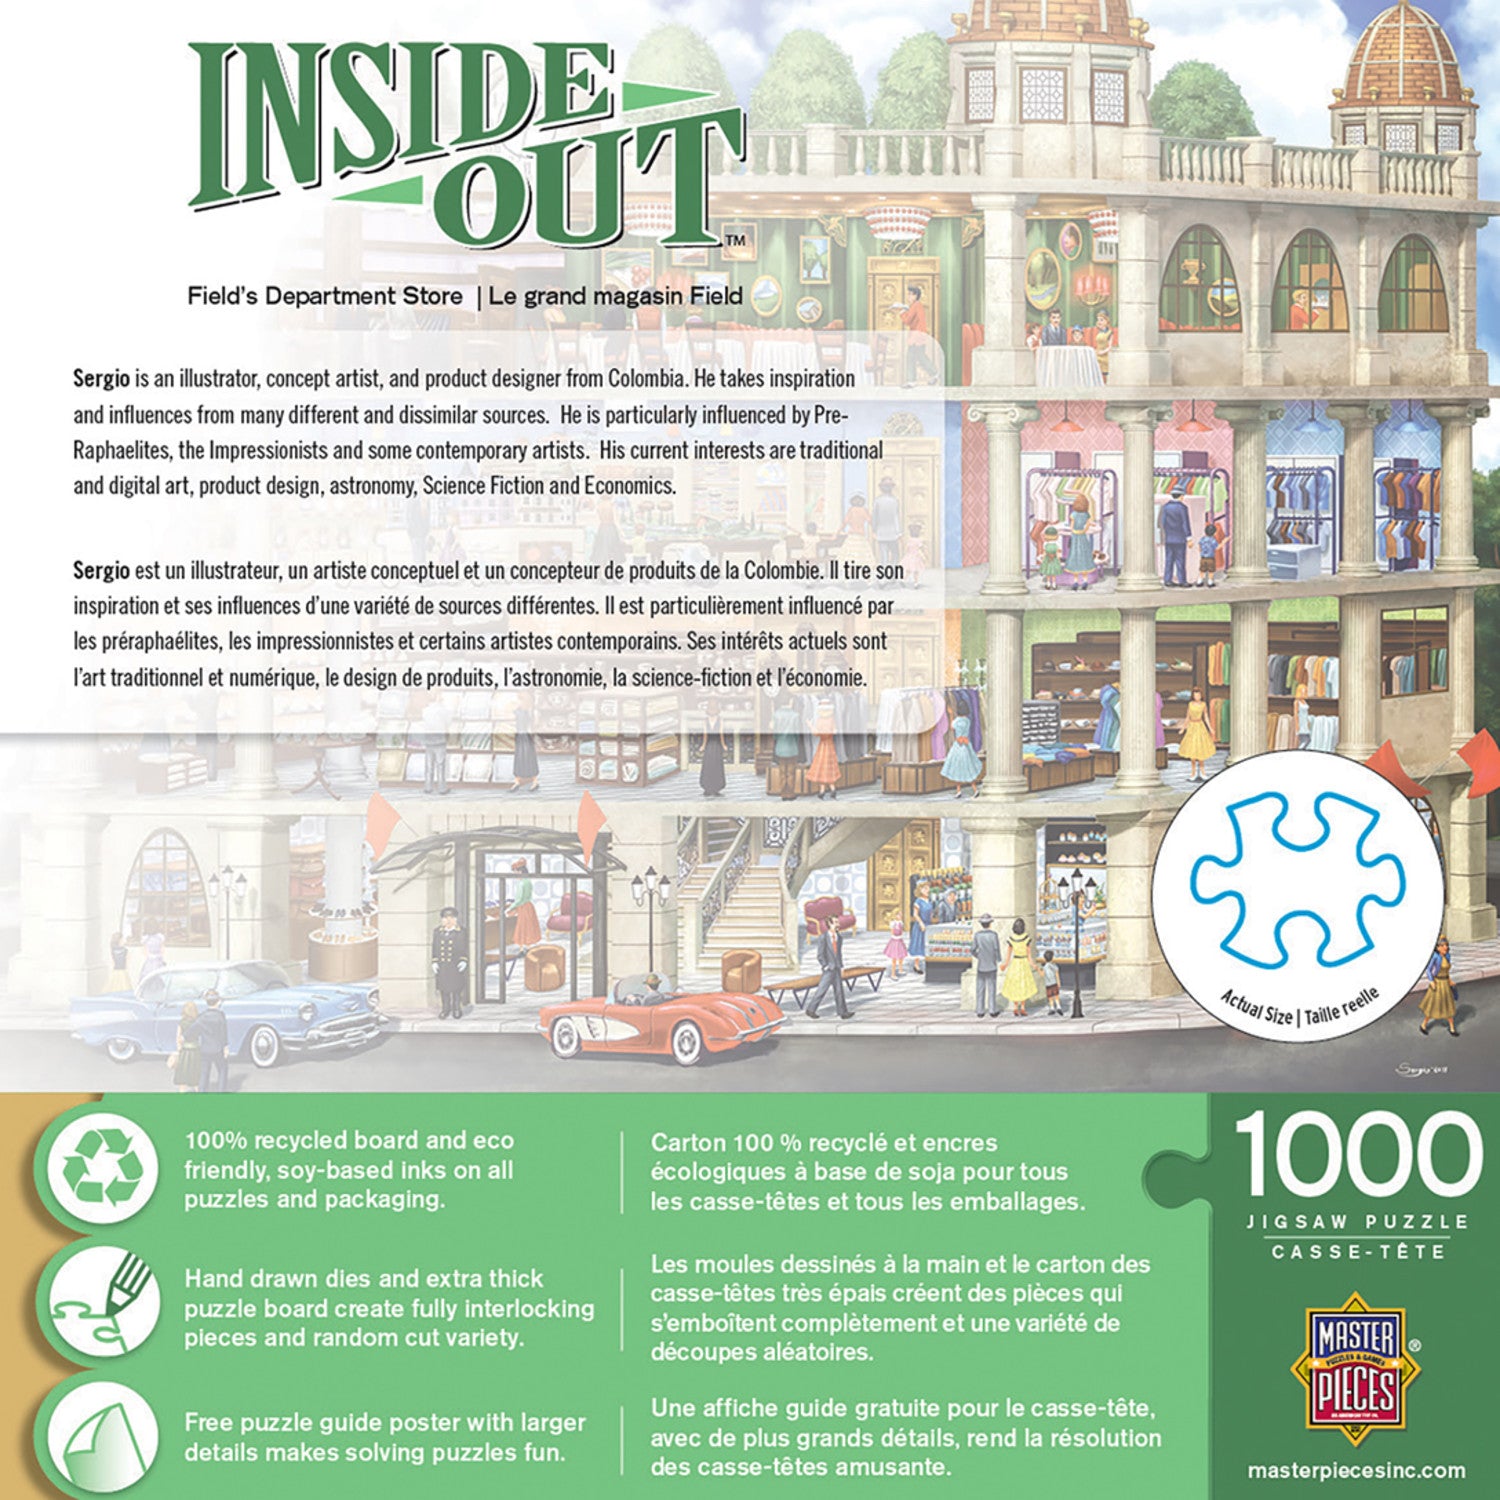 Inside Out - Field's Department Store 1000 Piece Puzzle